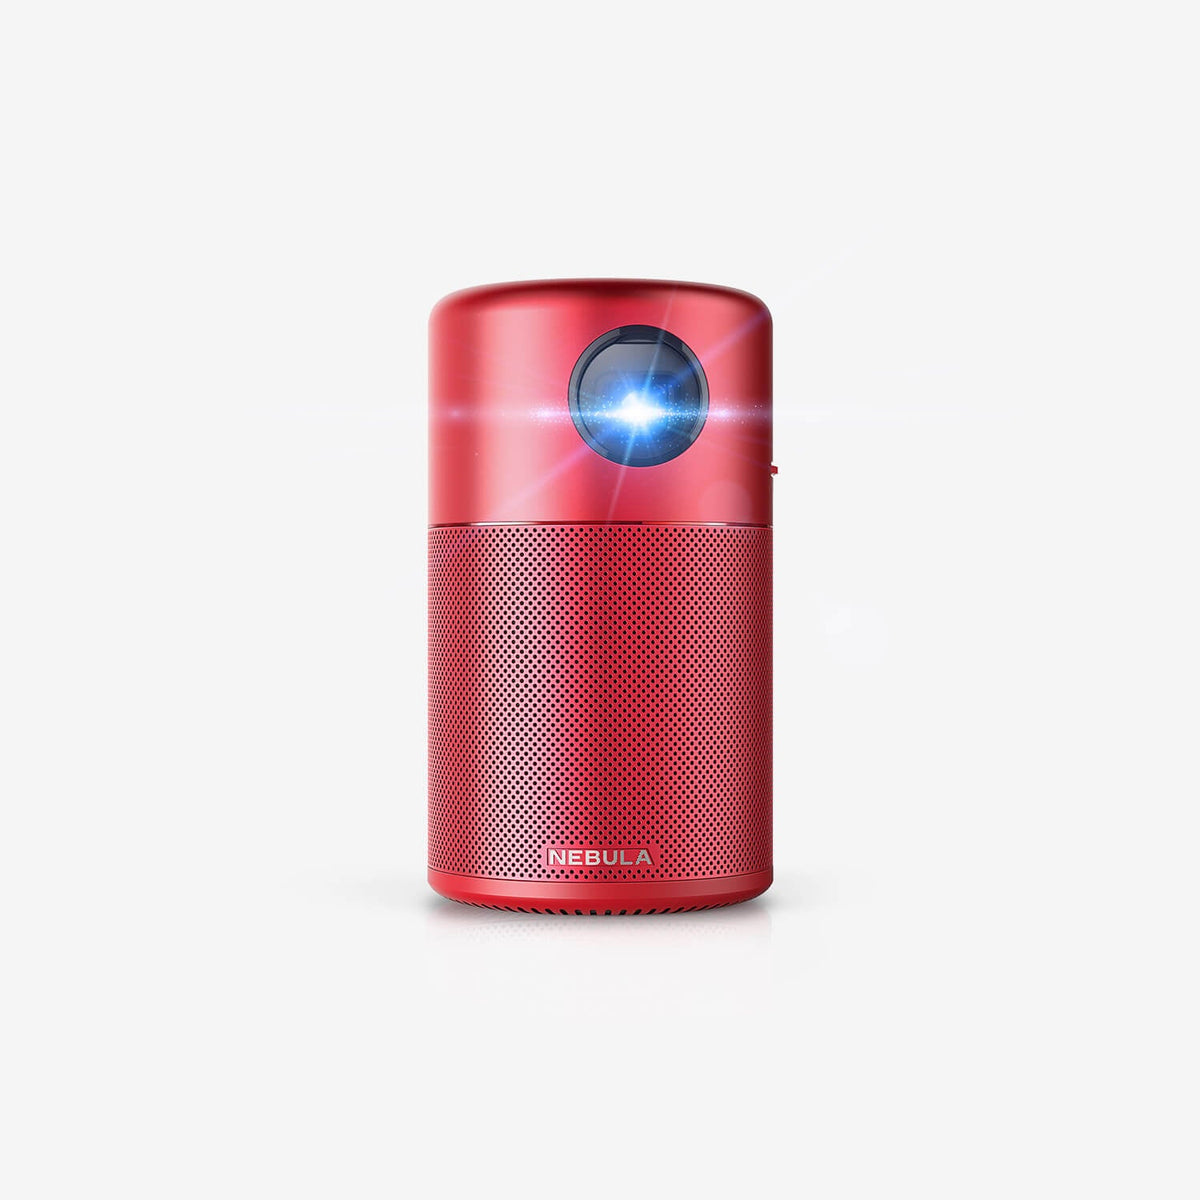 A red Nebula Capsule portable projector sits in a white room while projecting a blue light toward the camera.